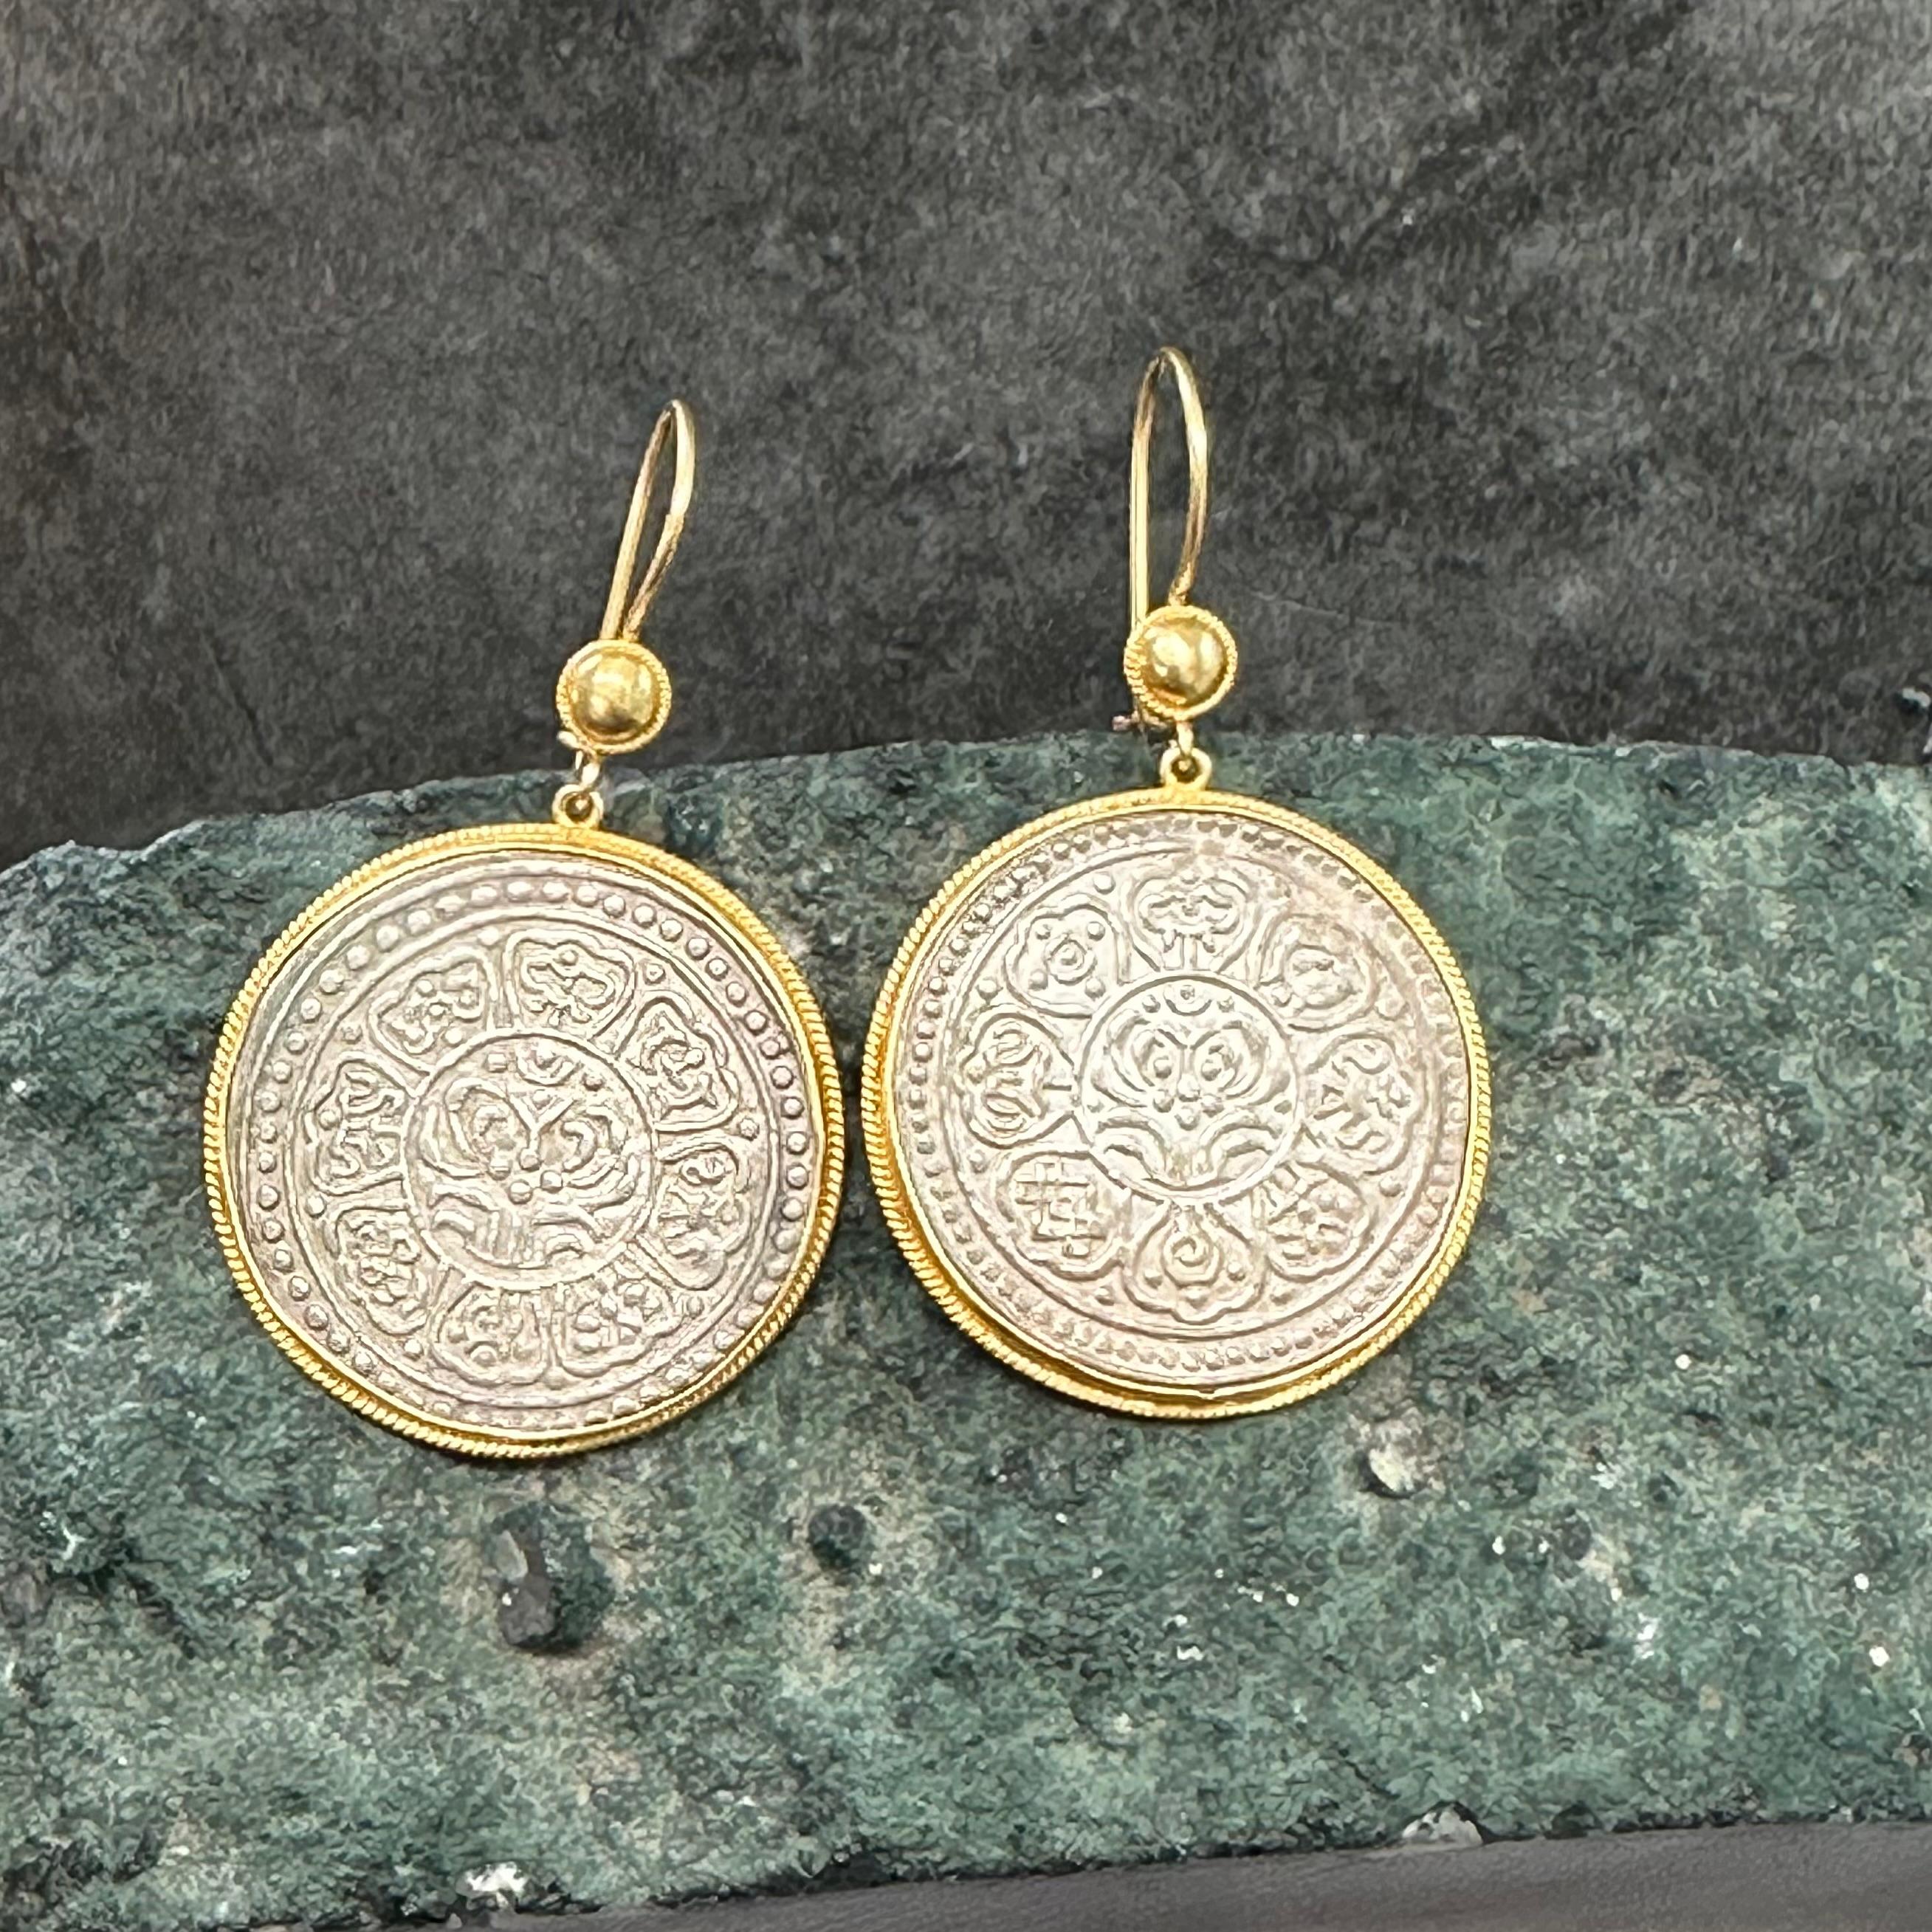 1912 Tibet Silver Tangka Coin 18K Gold Earrings In New Condition For Sale In Soquel, CA